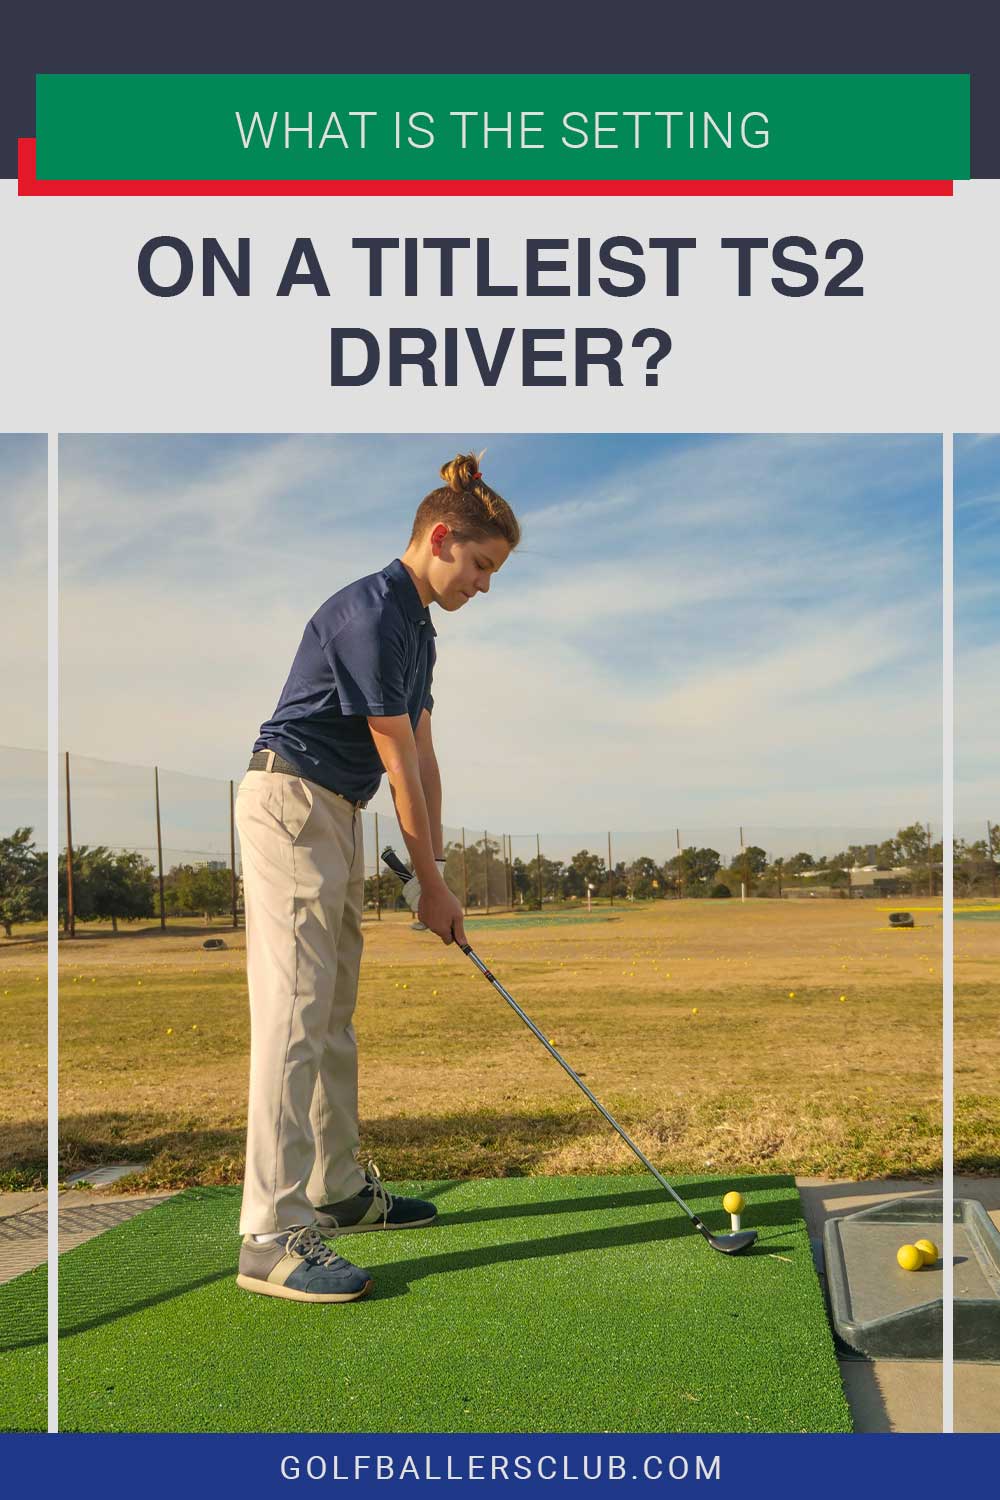 Man in blue shirt playing golf - What Is The Setting On A Titleist Ts2 Driver?